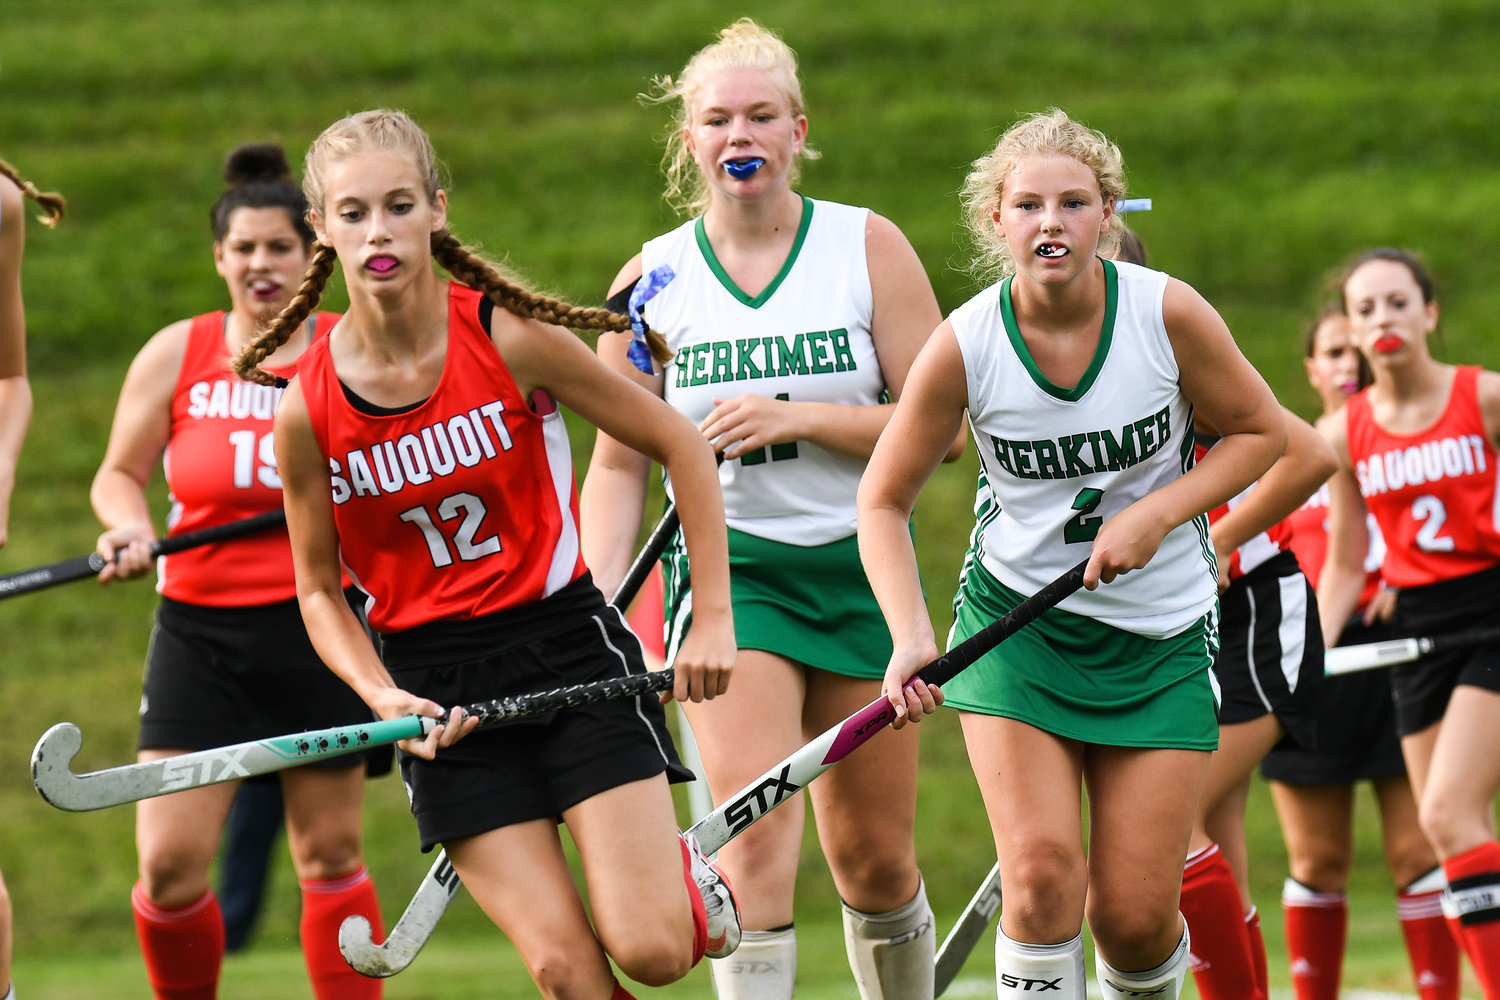 Sauquoit Valley’s Emilie Fancett (12) runs down the ball with Herkimer defenders Emily Marquissee and Audrey McDonnell (2) giving chase during the Center State Conference field hockey game on Monday in Herkimer. The two teams played to a scoreless result.